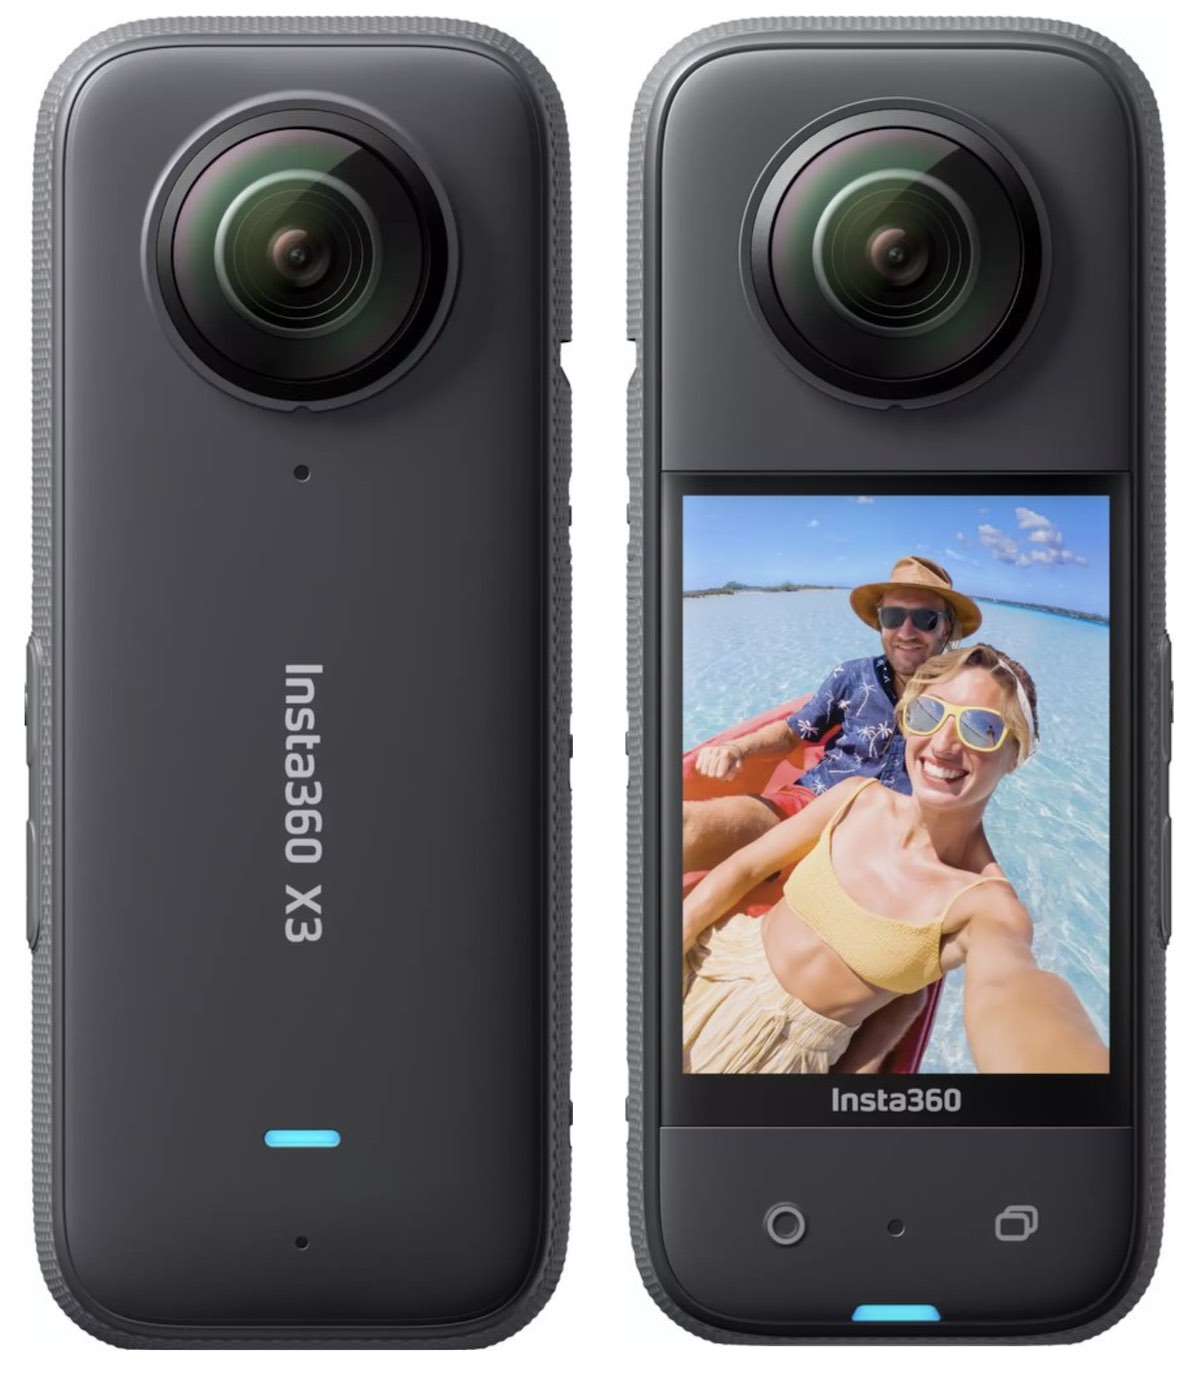 Insta360 will announce a new X3 360-degree action camera on